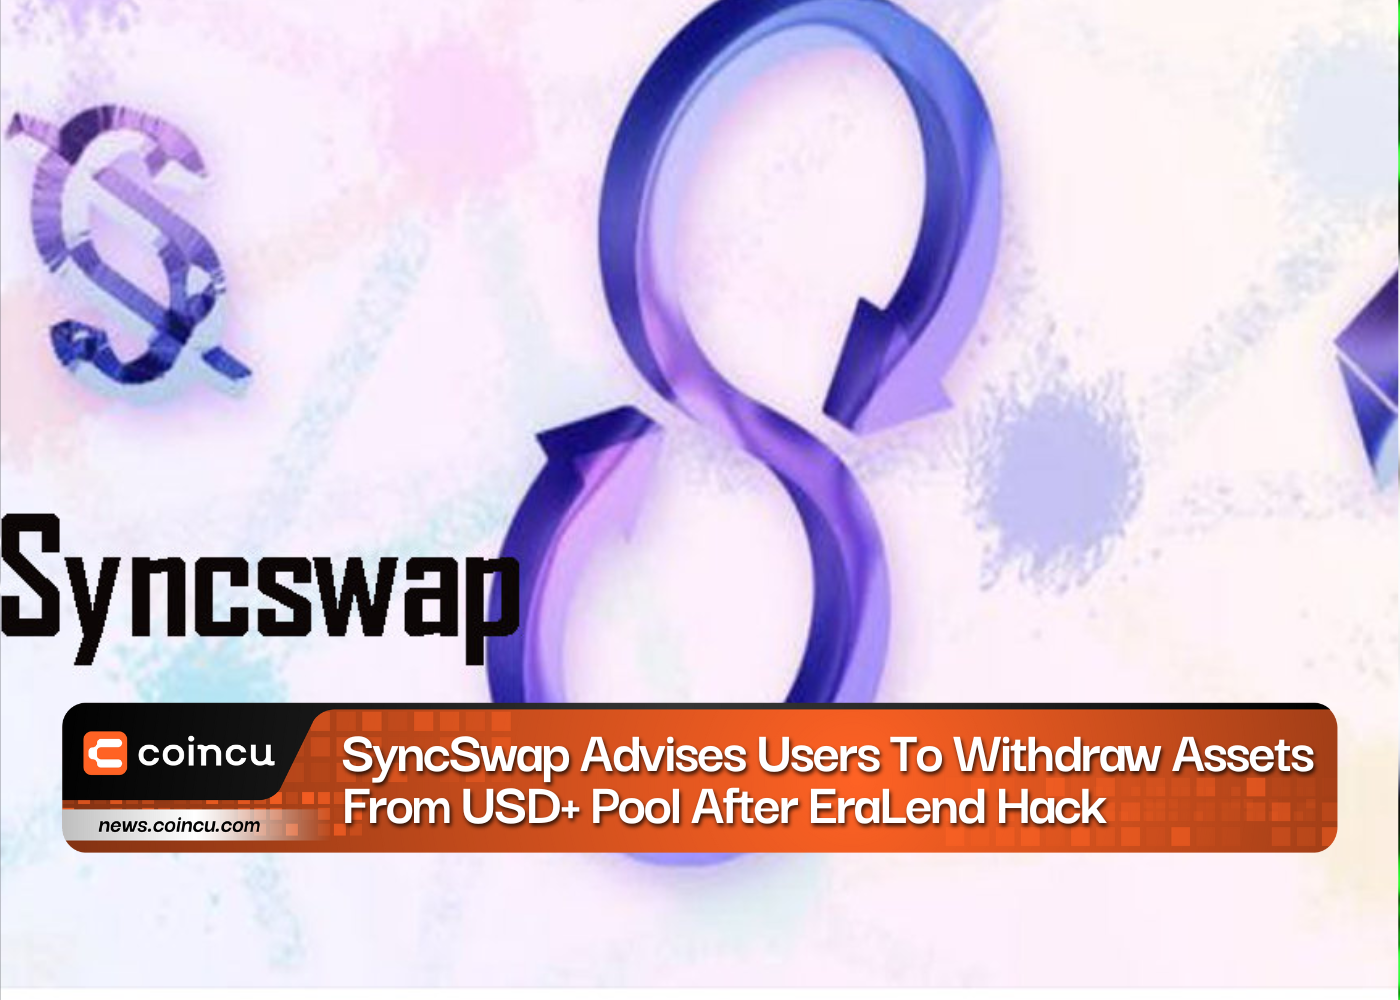 SyncSwap Advises Users To Withdraw Assets From USD+ Pool After EraLend Hack